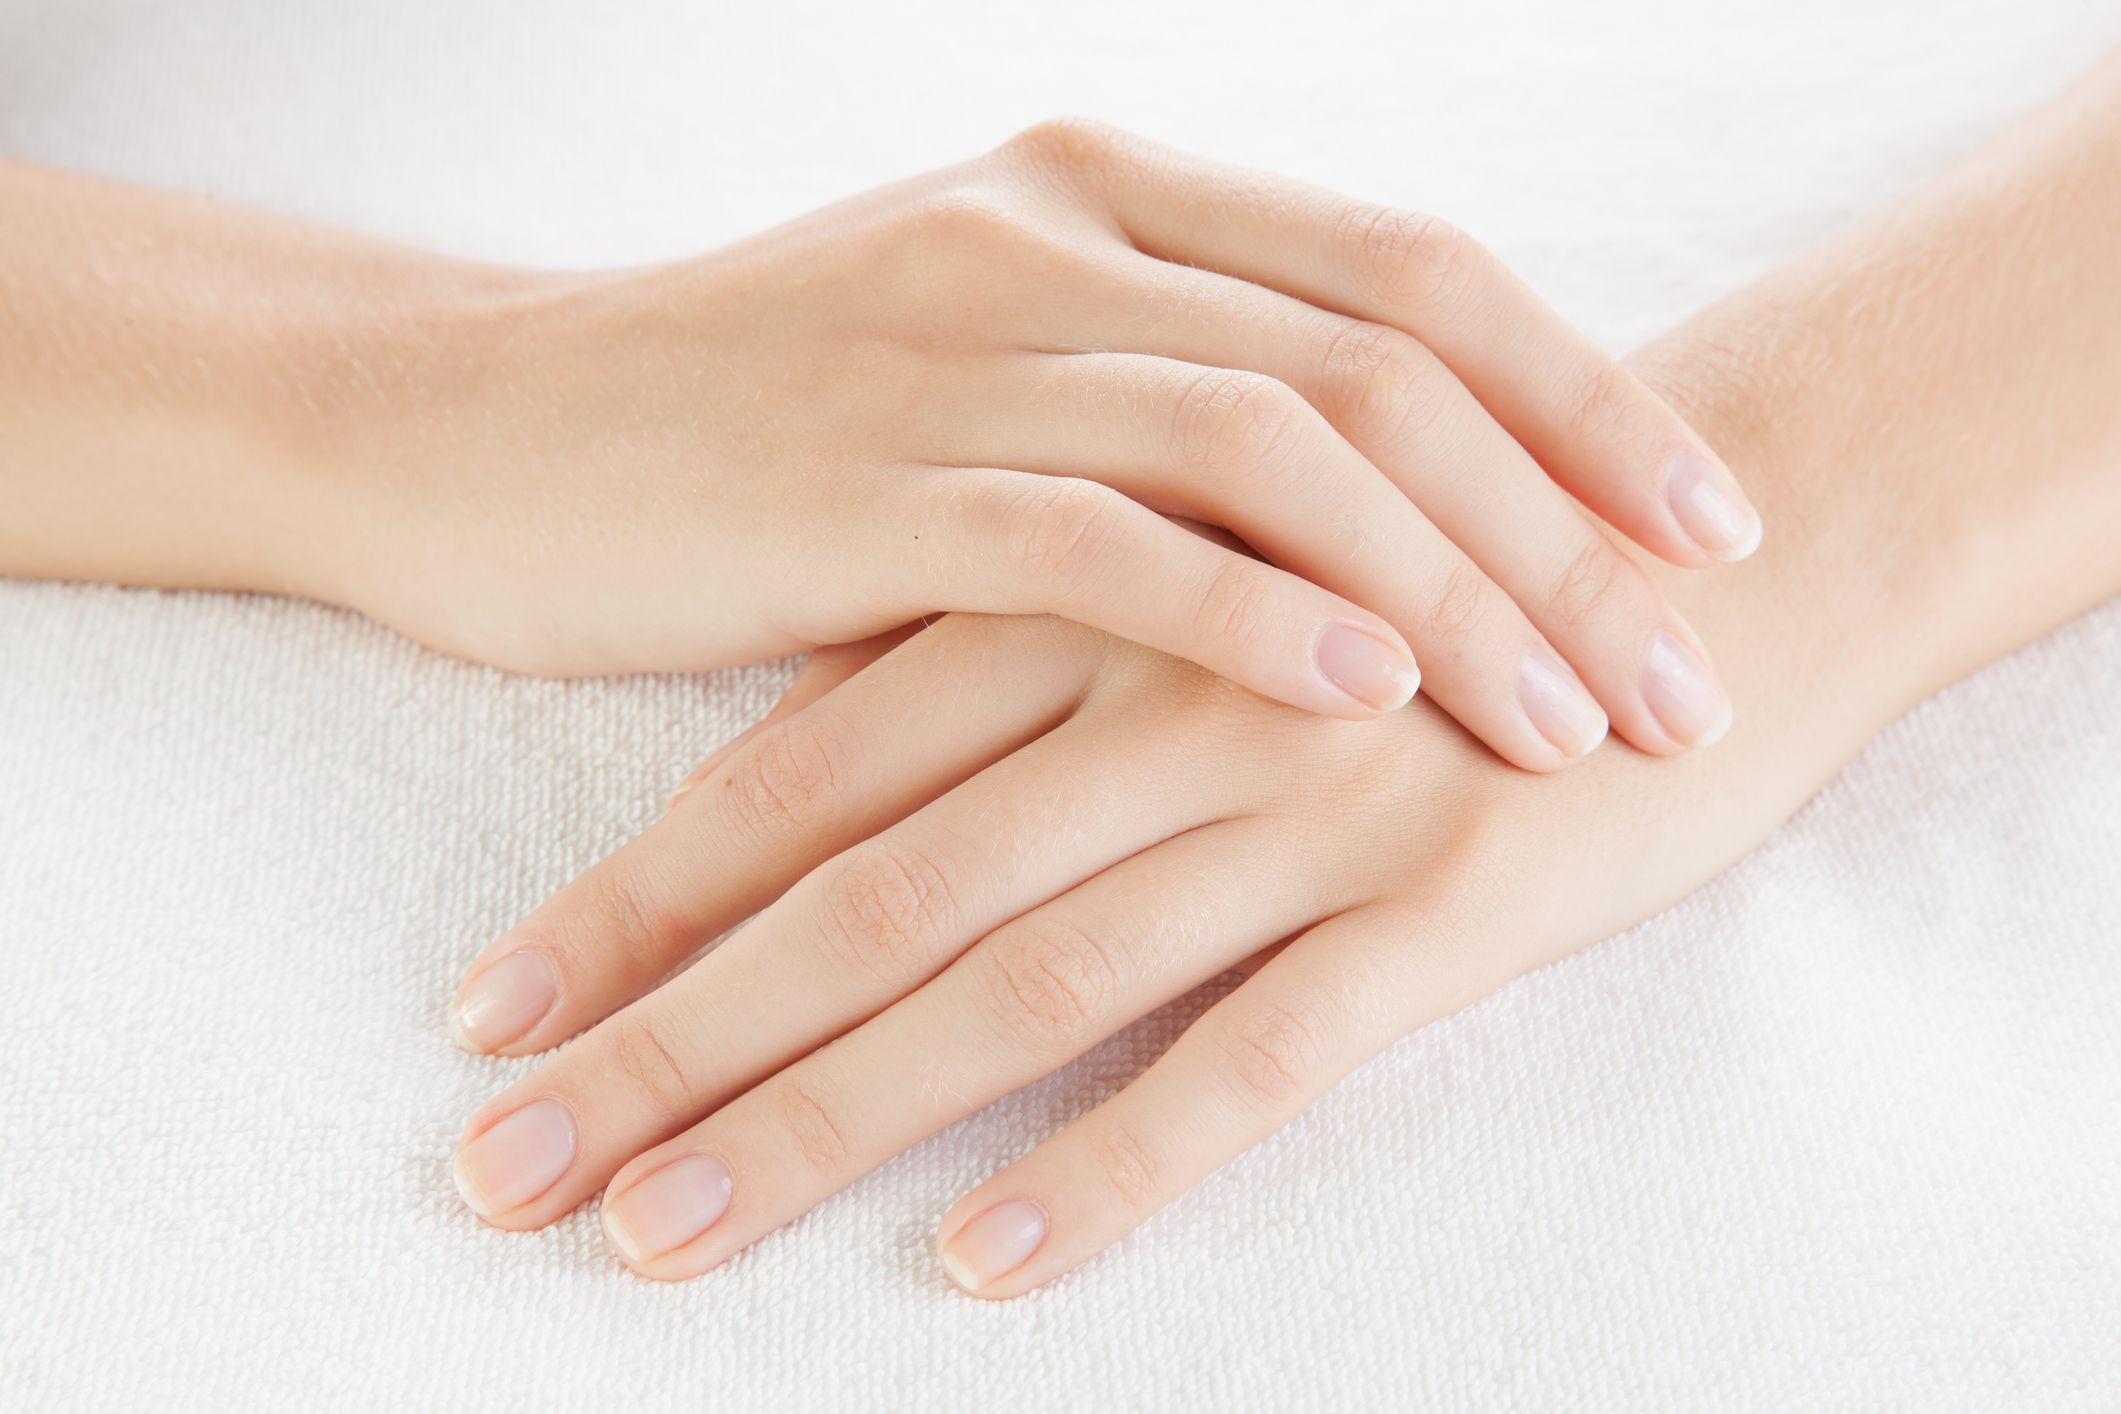 Magnolia's Natural Nail Care Clinic - We provide superb nail care services  to all residents around Sterling, VA, offering everything from basic to  premium nail care packages. Call 703-430-7000 to learn more. | Facebook